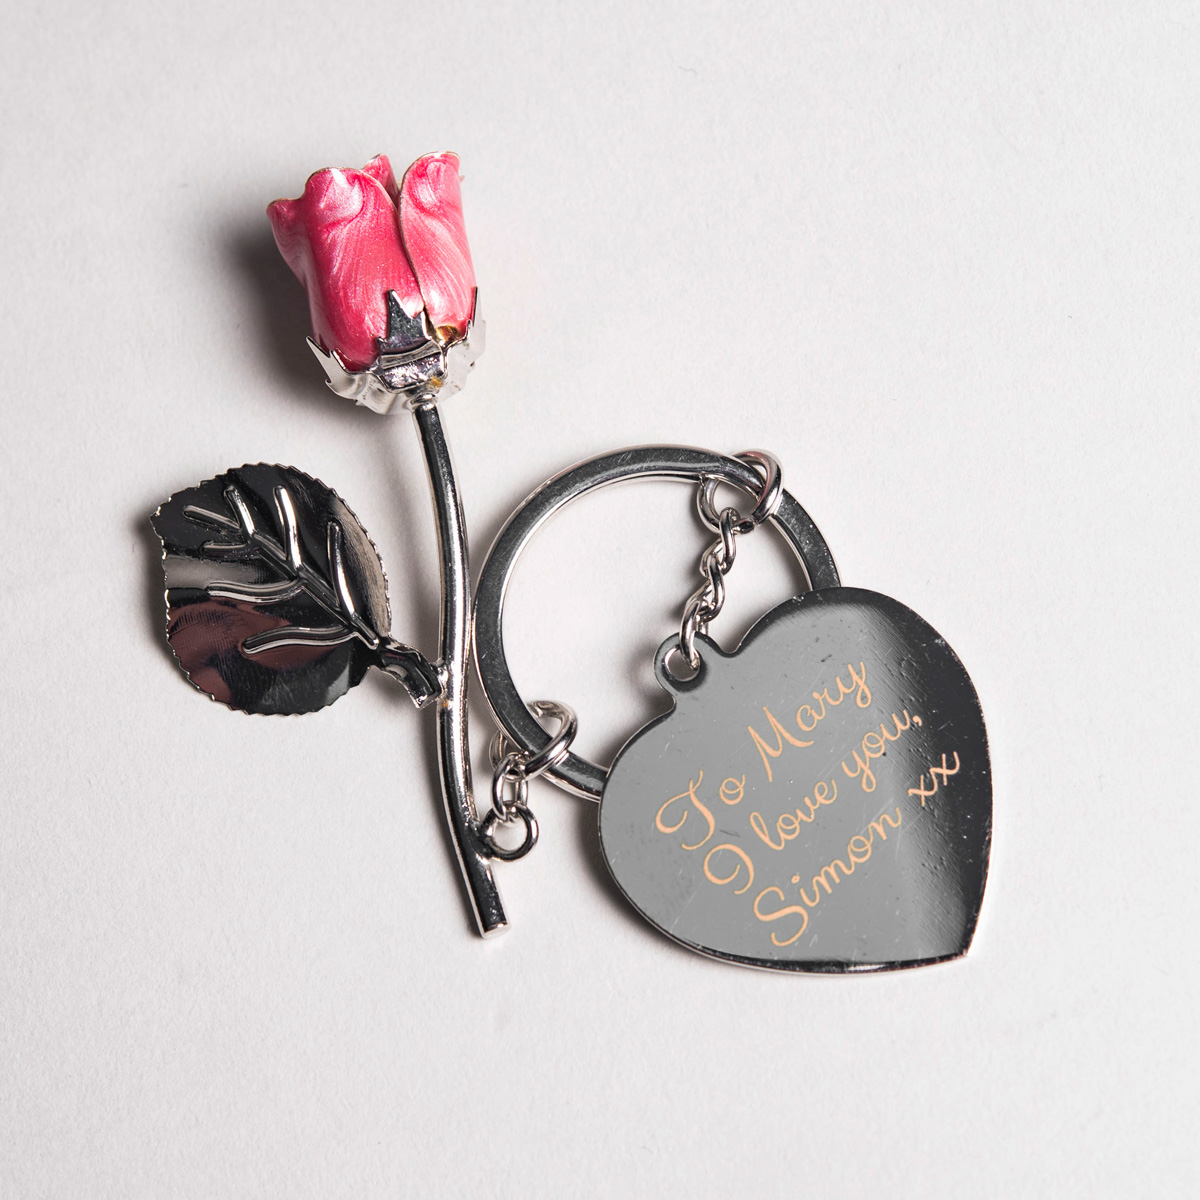 Personalised Key Ring - Silver Plated Rose